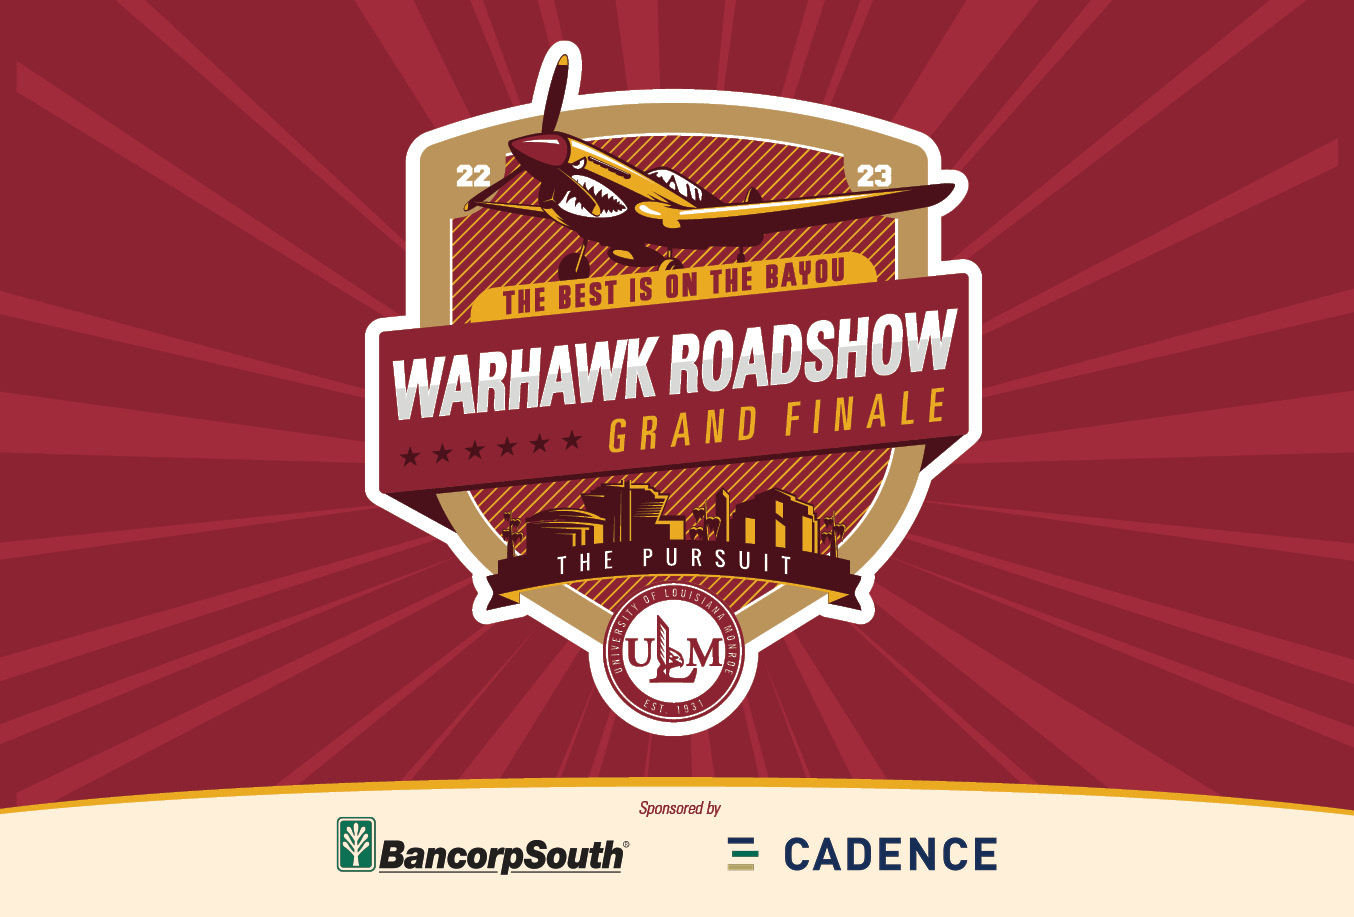 The Warhawk Roadshow Finale and The Pursuit scheduled for August 4